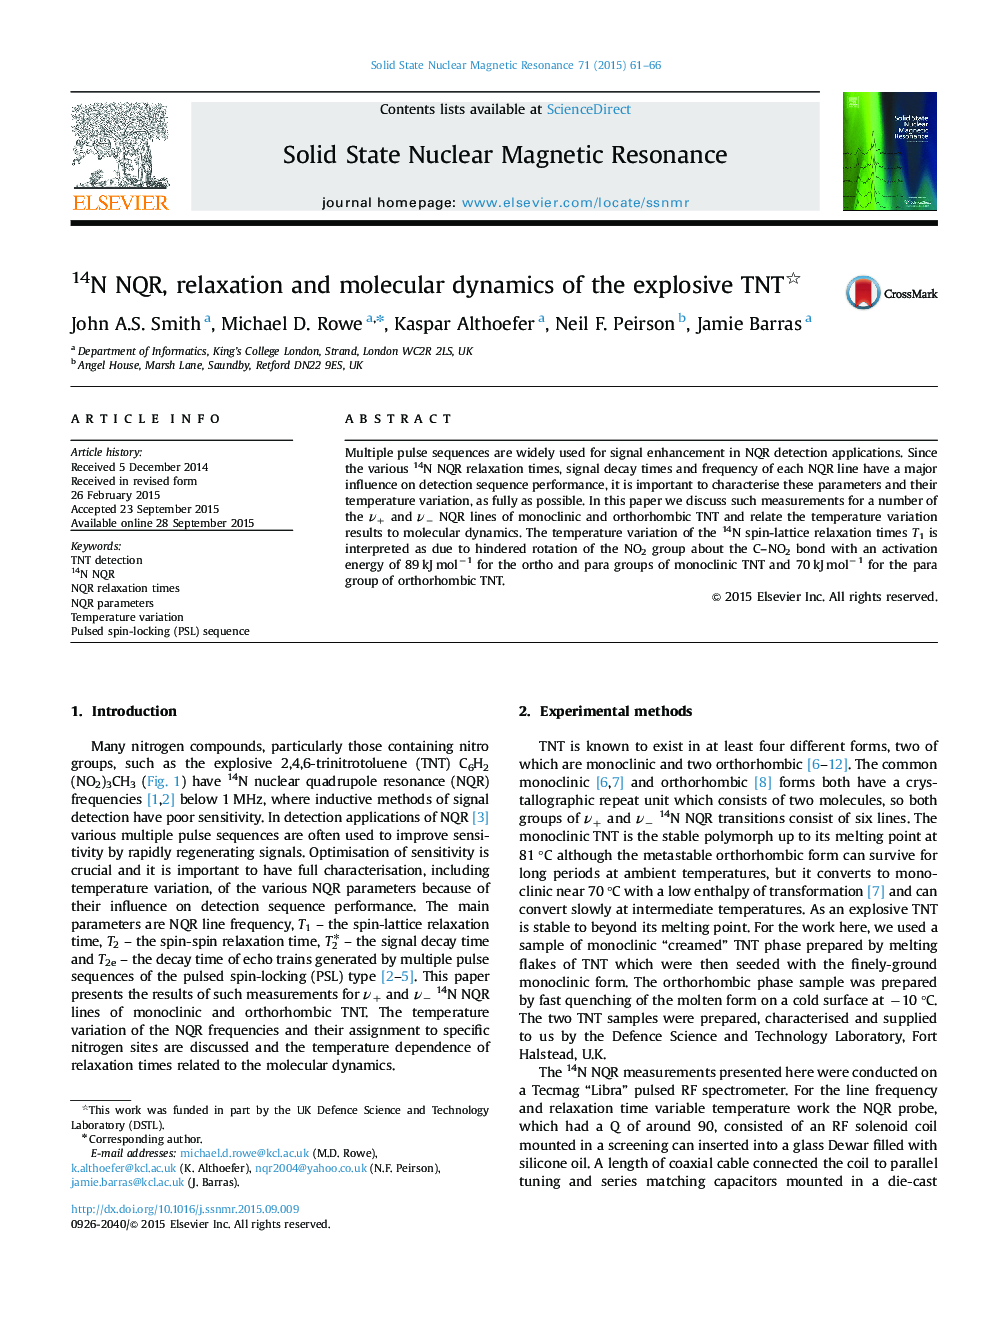 14N NQR, relaxation and molecular dynamics of the explosive TNT